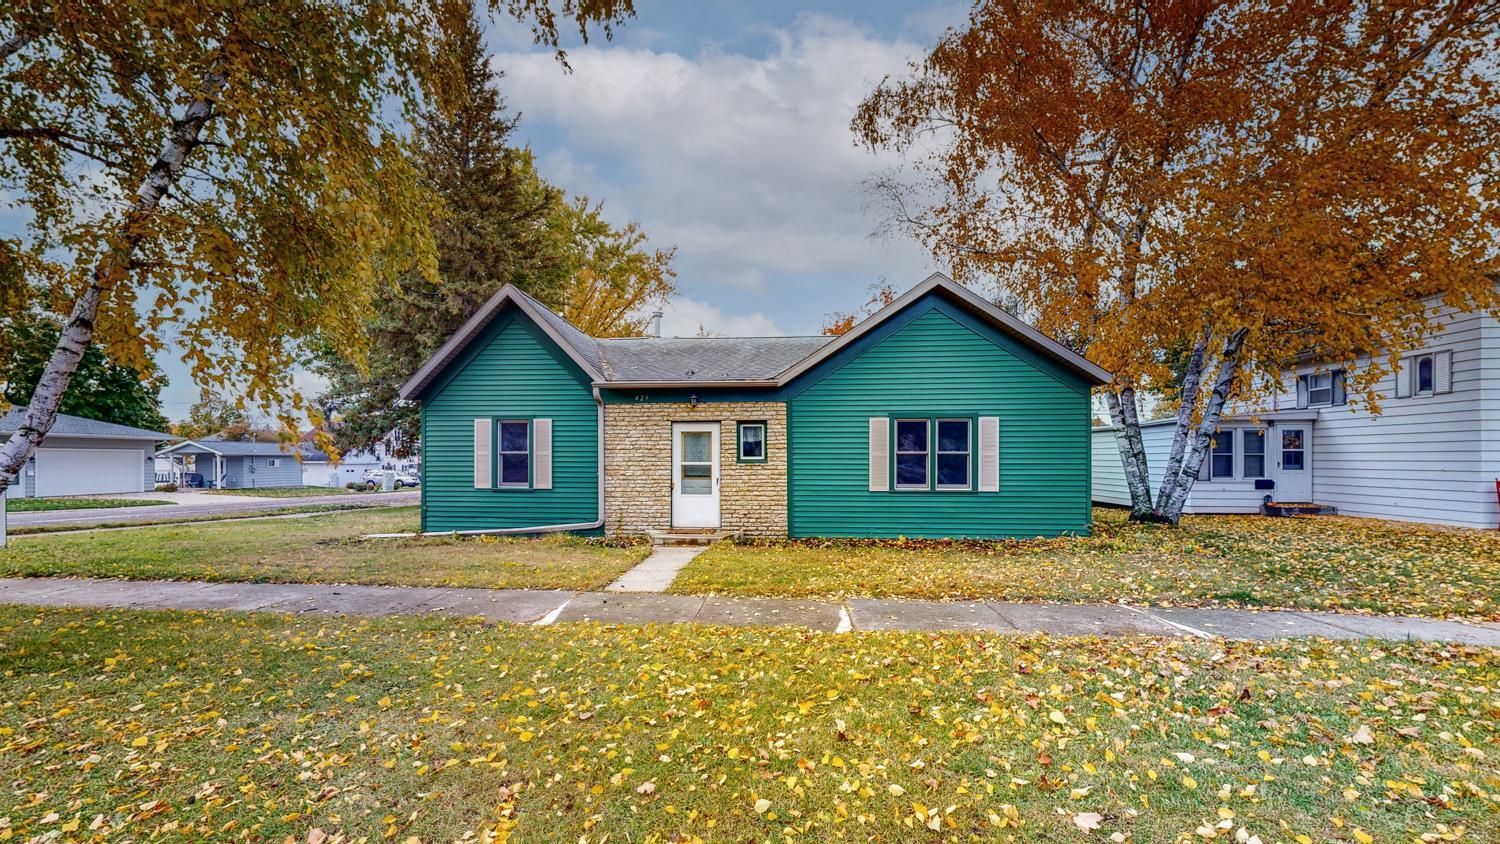 3 bed 1 bath ranch home for sale 429 Fillmore St SE Chatfield MN 55923